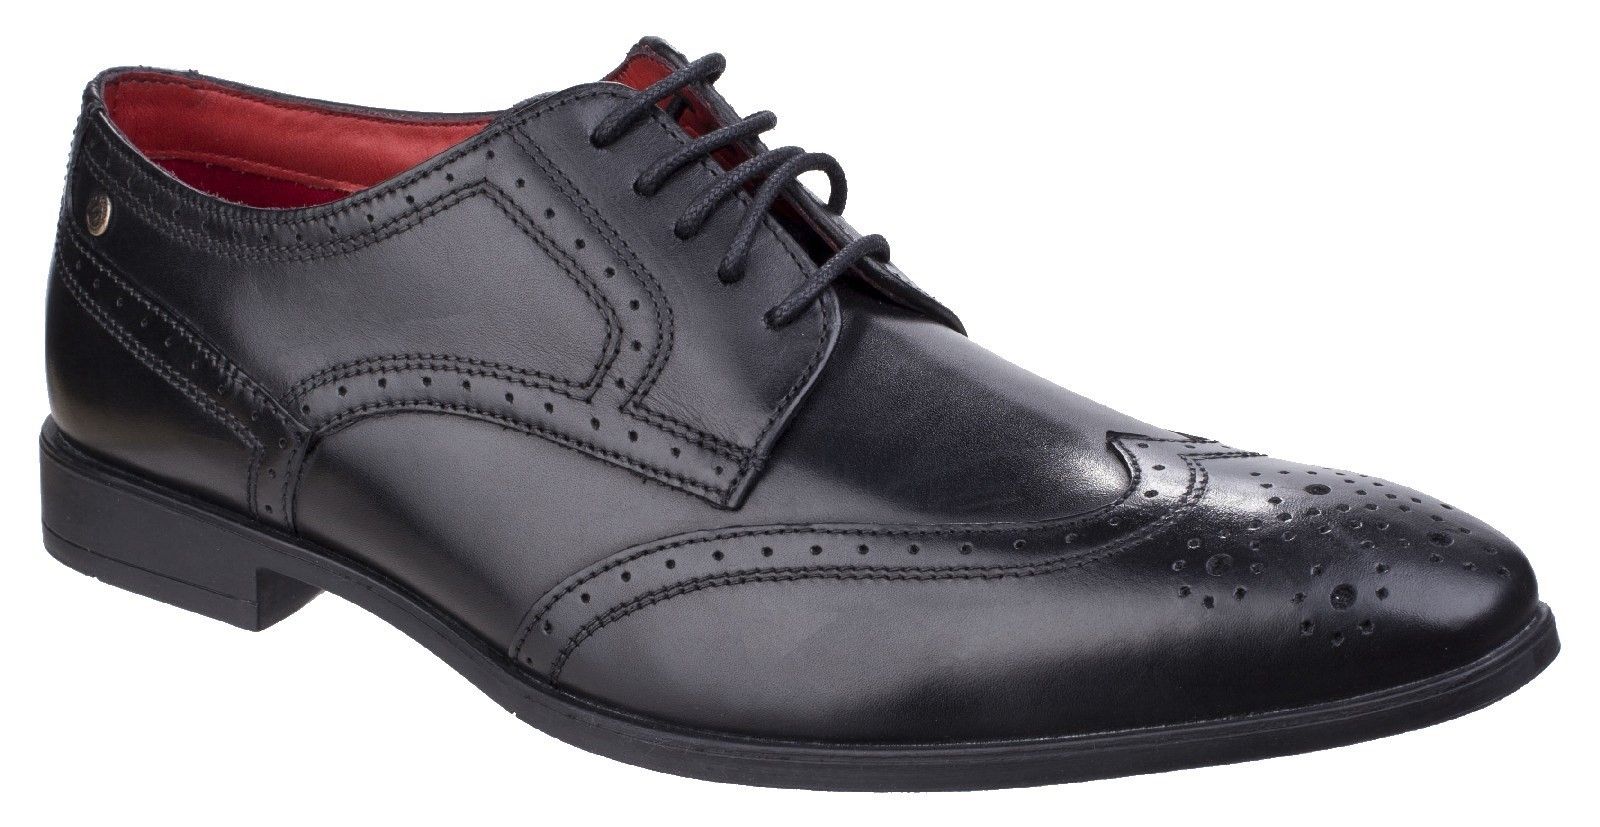 Crown is a chiselled wing tip brogue from Base London's Sterling Range. Its slender design will give you a leaner, taller look than a rounder toe shoe. Perfect for the office or theatre, this derby ensures a firm grip with its textured rubber sole. High quality waxy leather with deep shine. 
High quality leather lining.